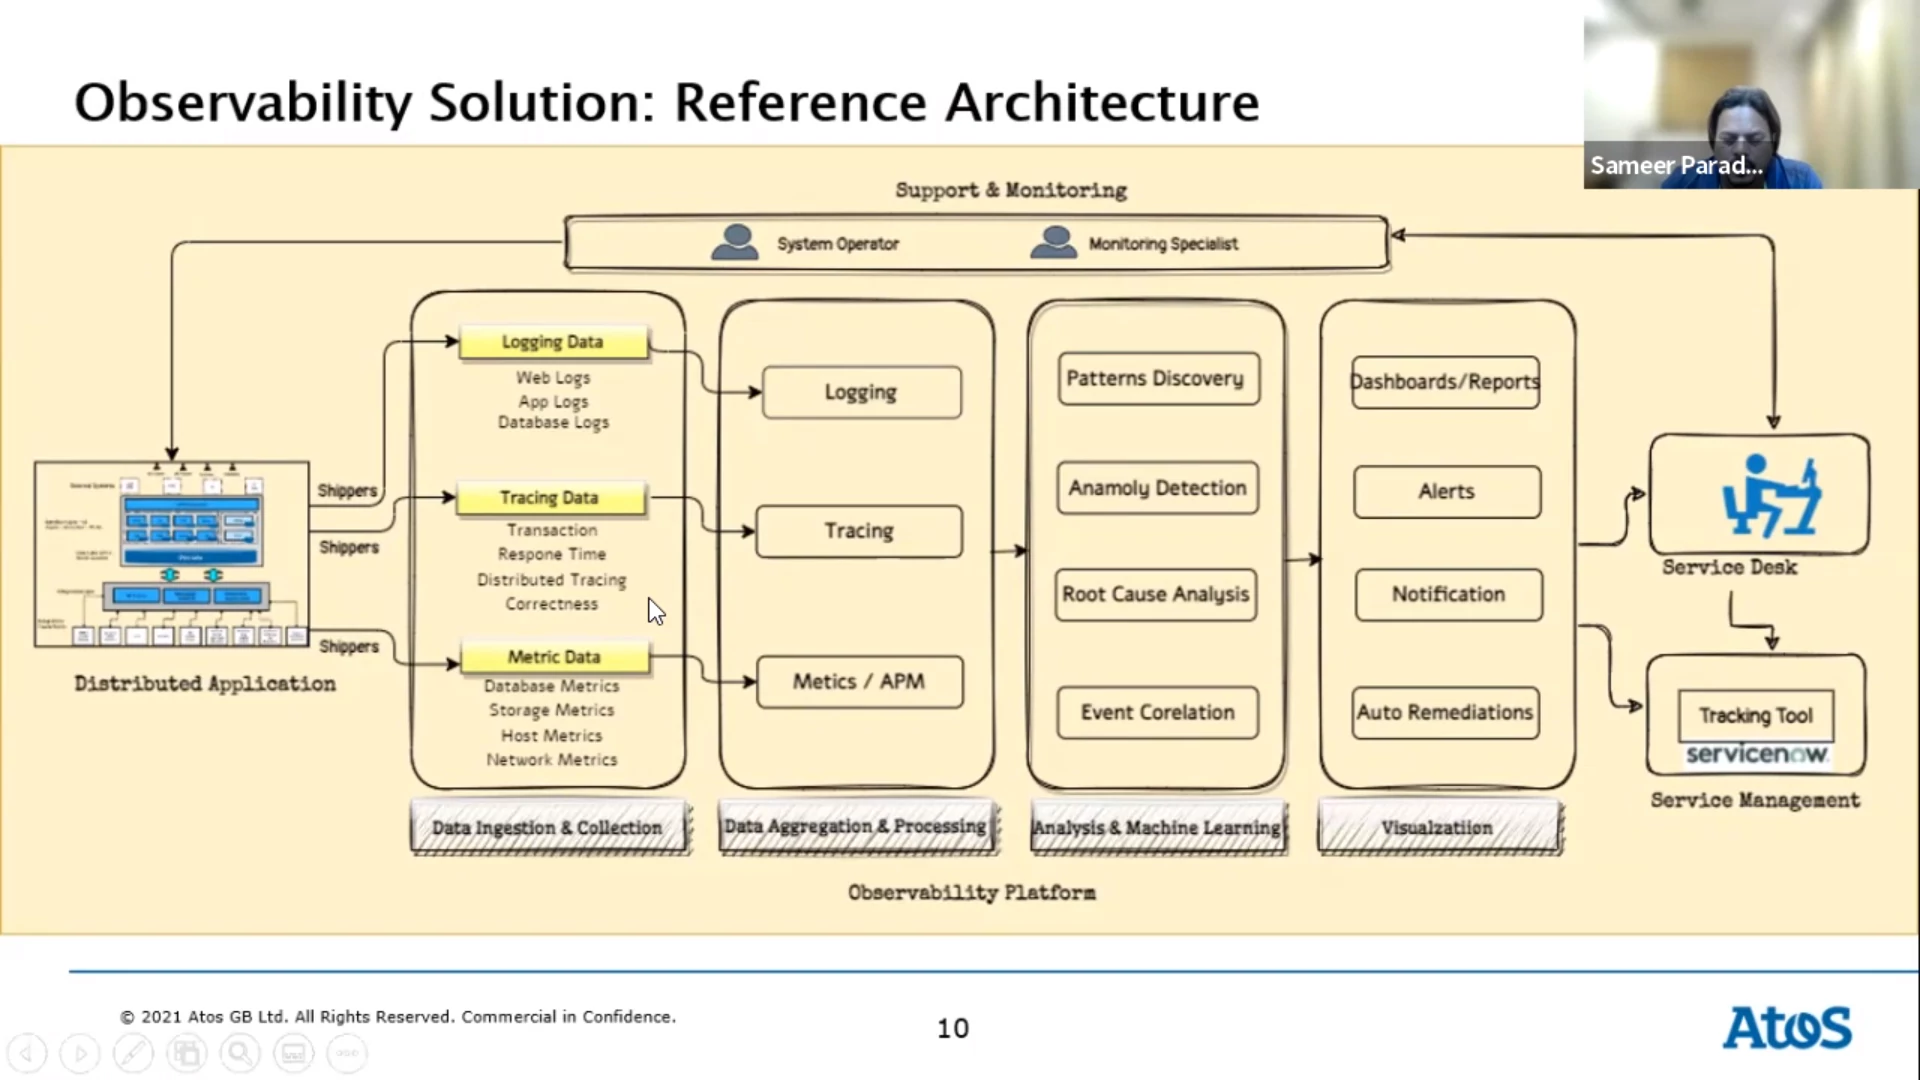 Sameer Paradkar shows a reference architecture of an observability solution